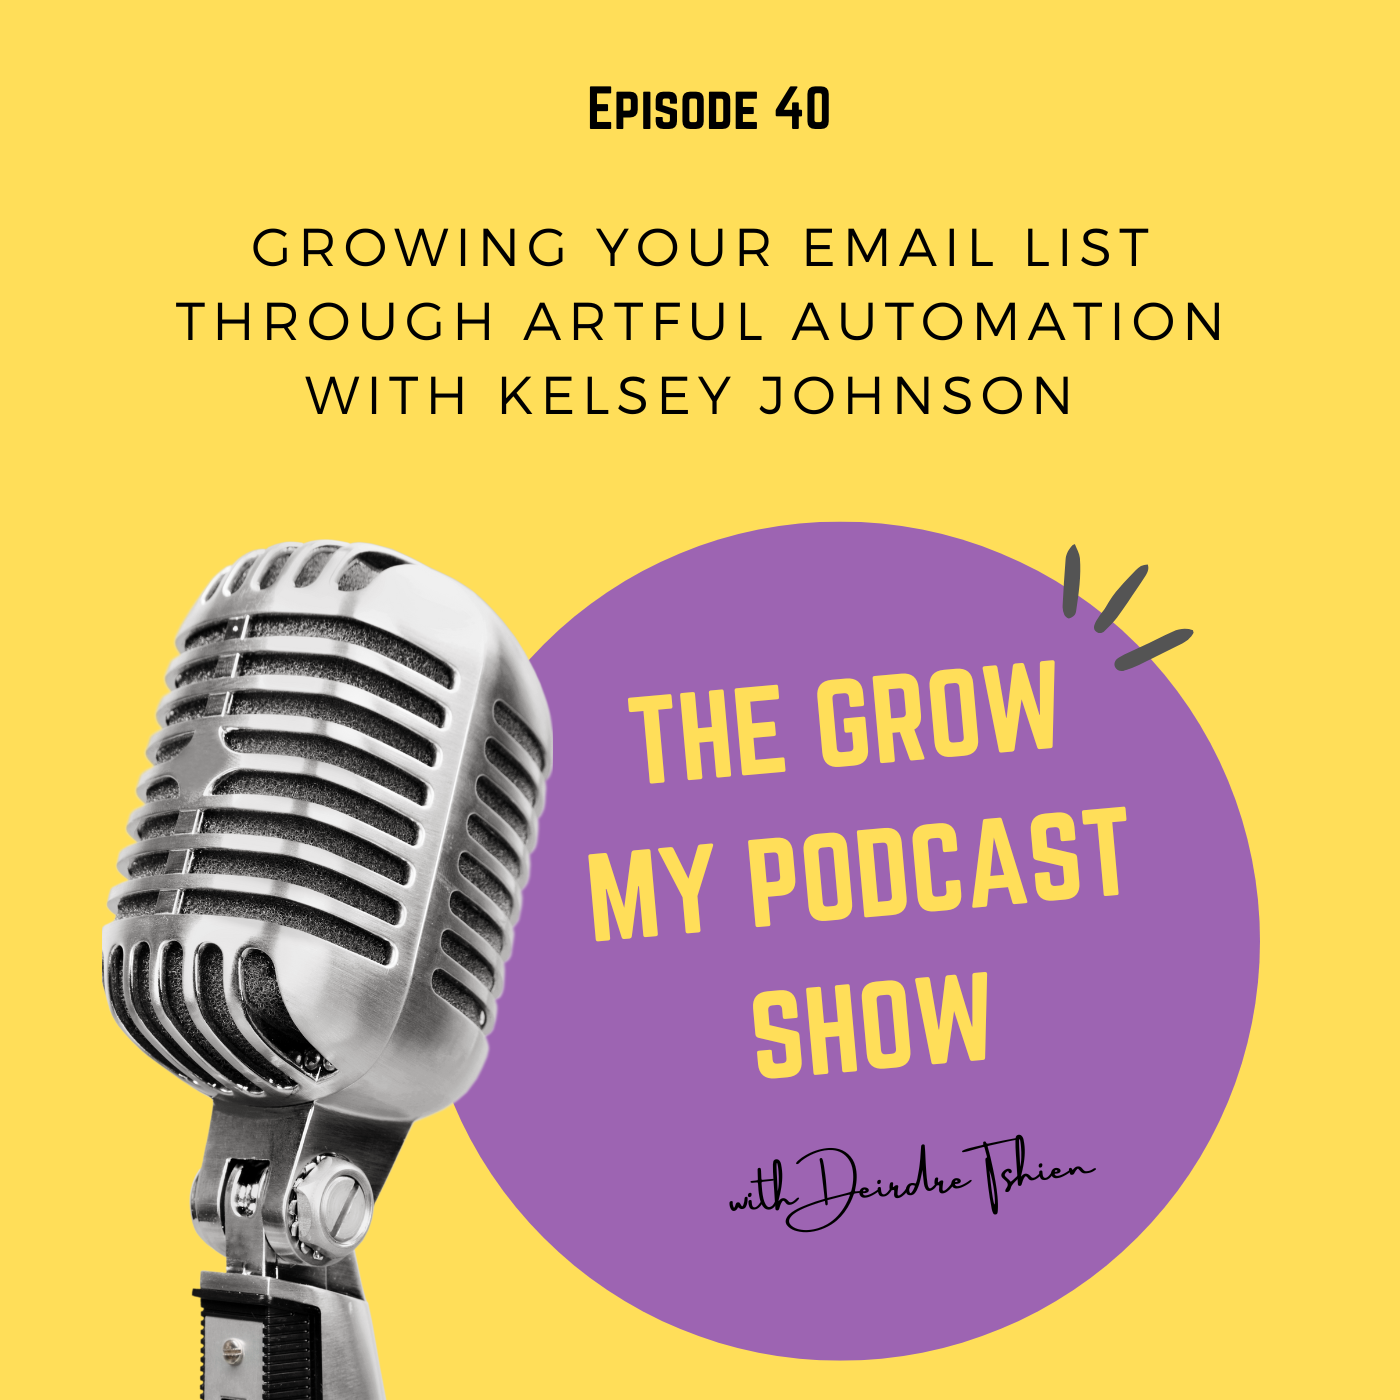 40. Growing your email list through artful automation with Kelsey Johnson Image